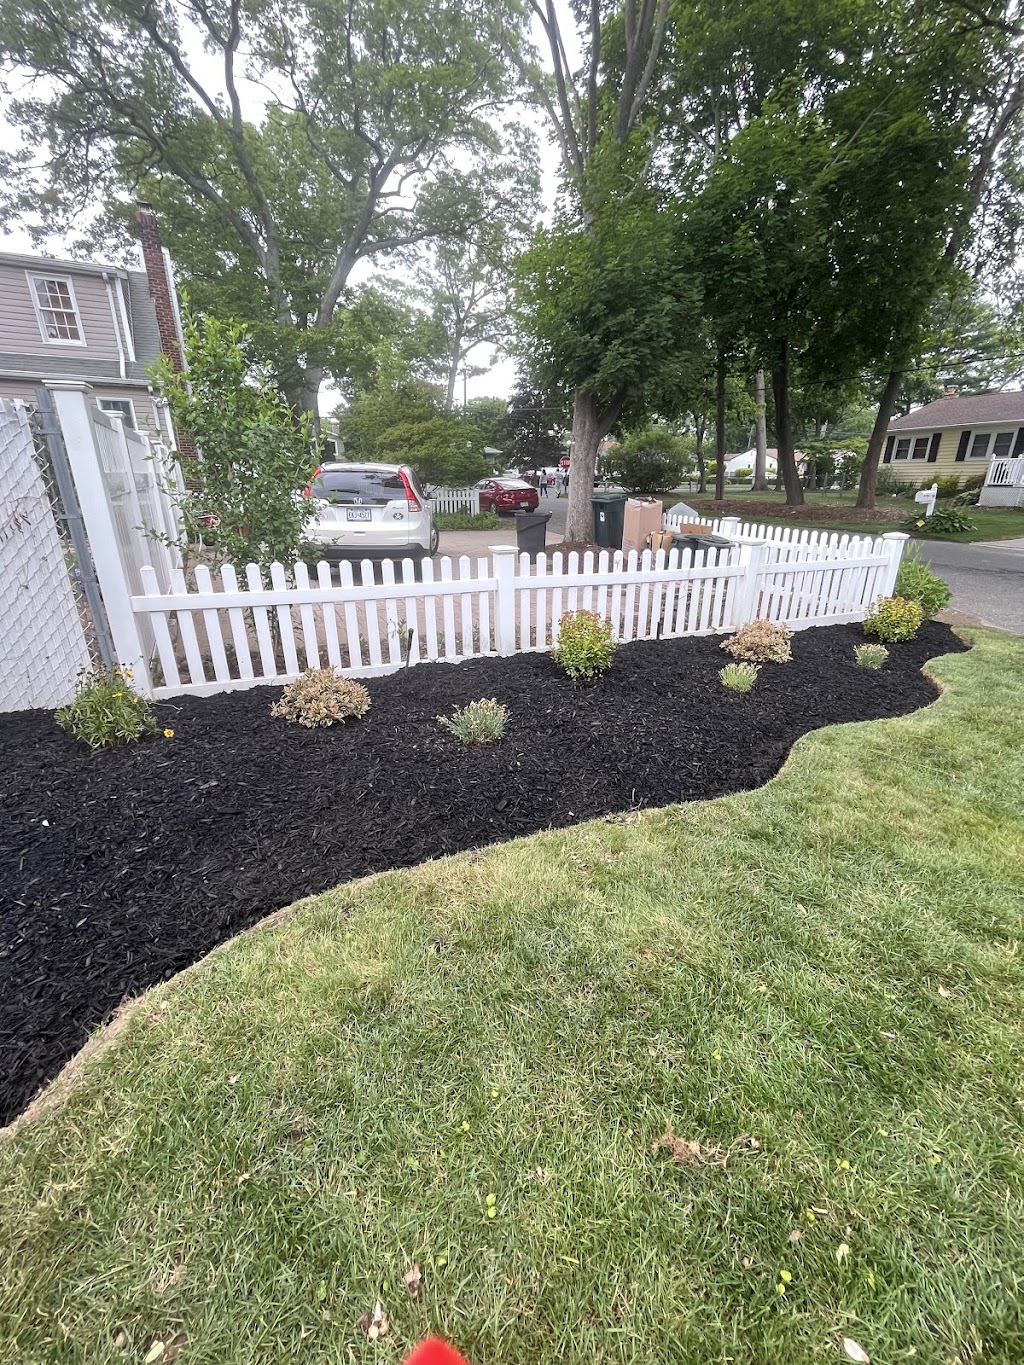 Making Solid Ground Lawn Care Inc | 19 American Ave, Coram, NY 11727 | Phone: (631) 903-3868